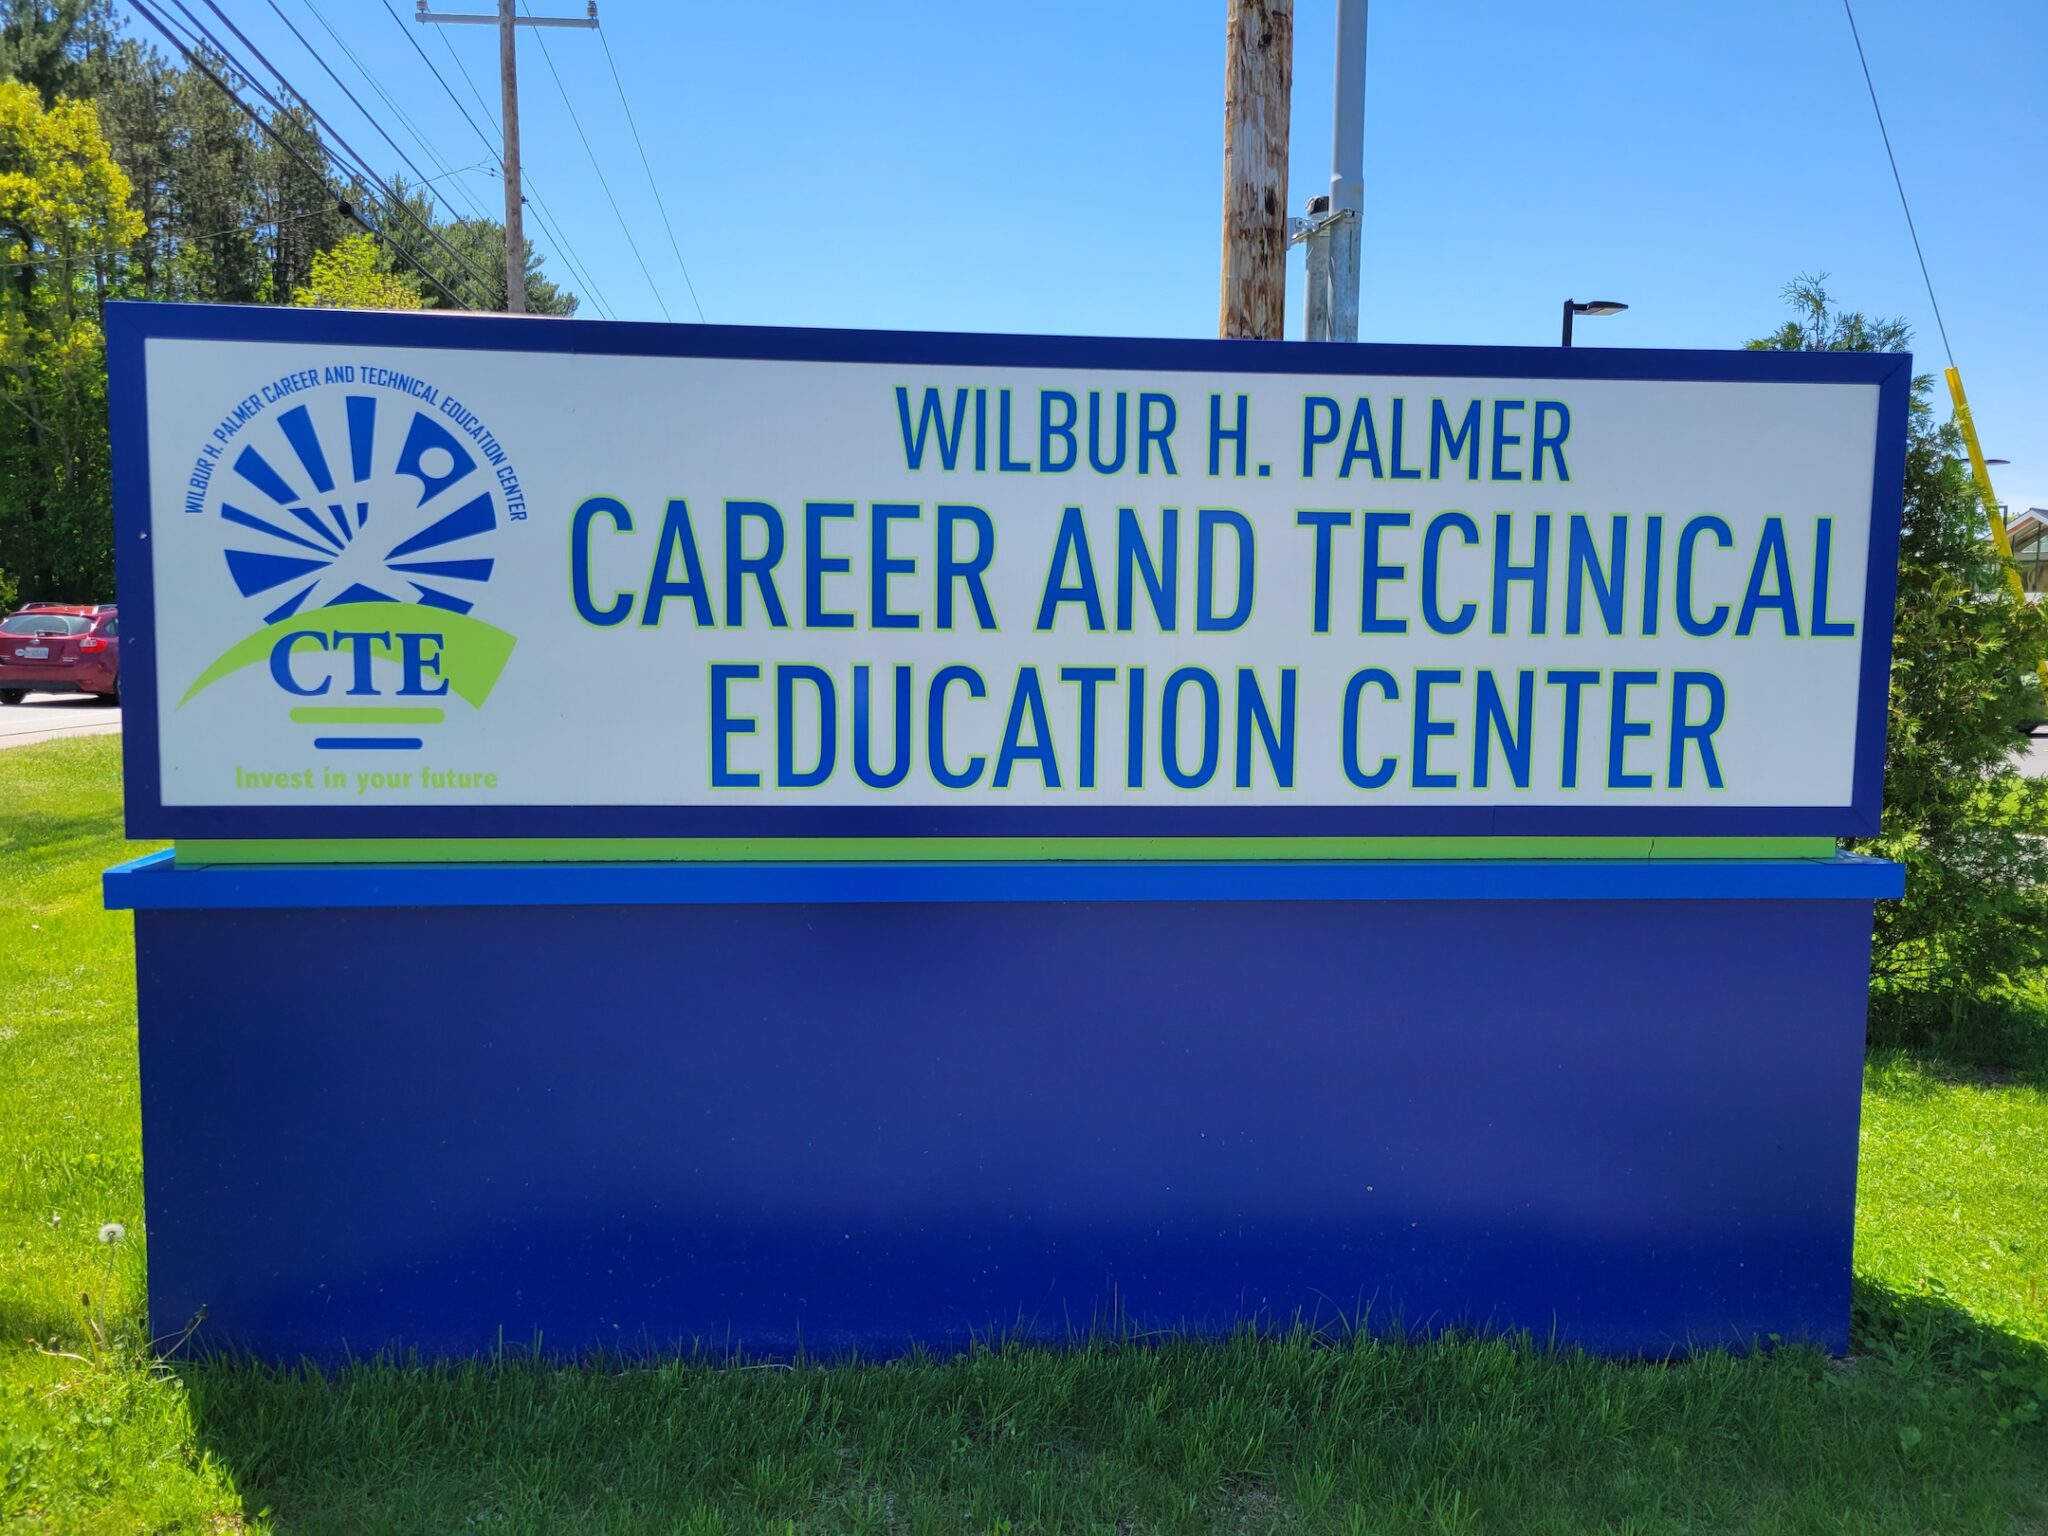 Career and technical education programs in high demand throughout the state